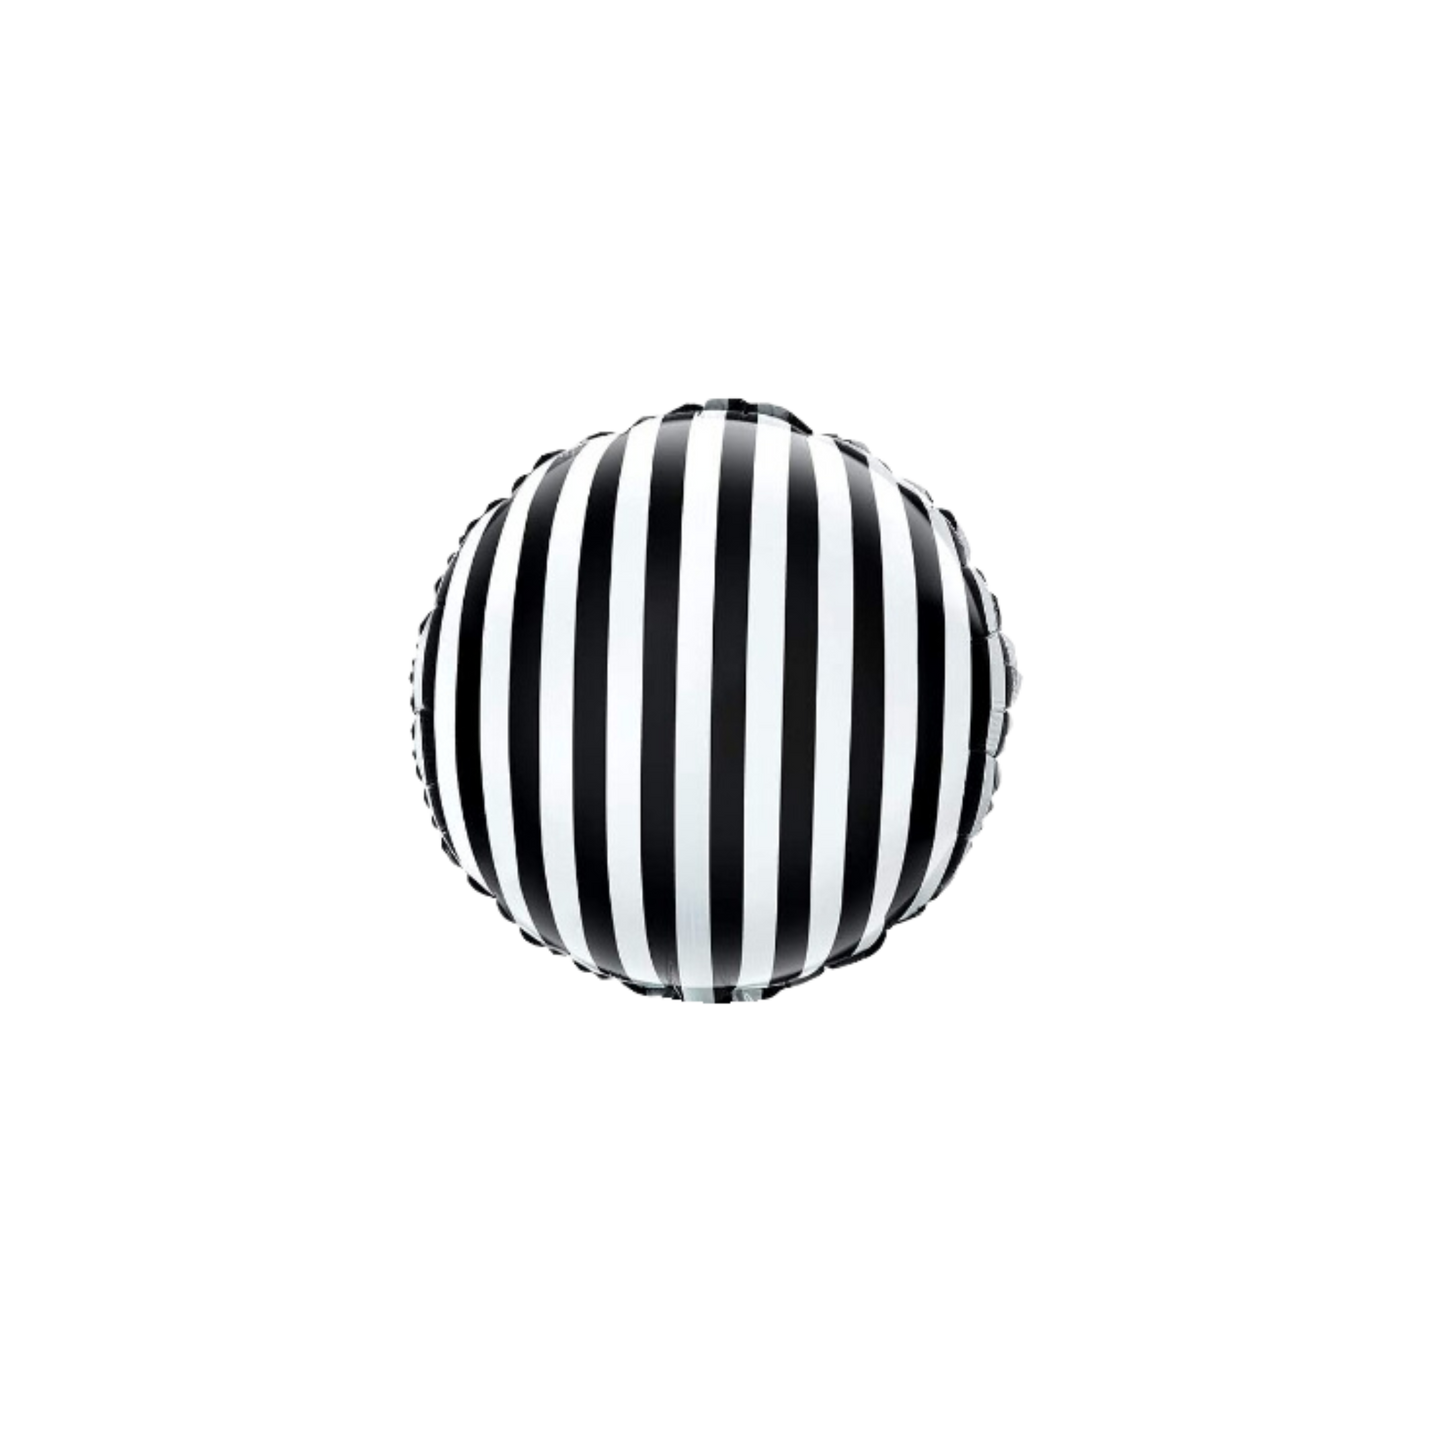 Black and White Stripe Balloon (pack of 3)